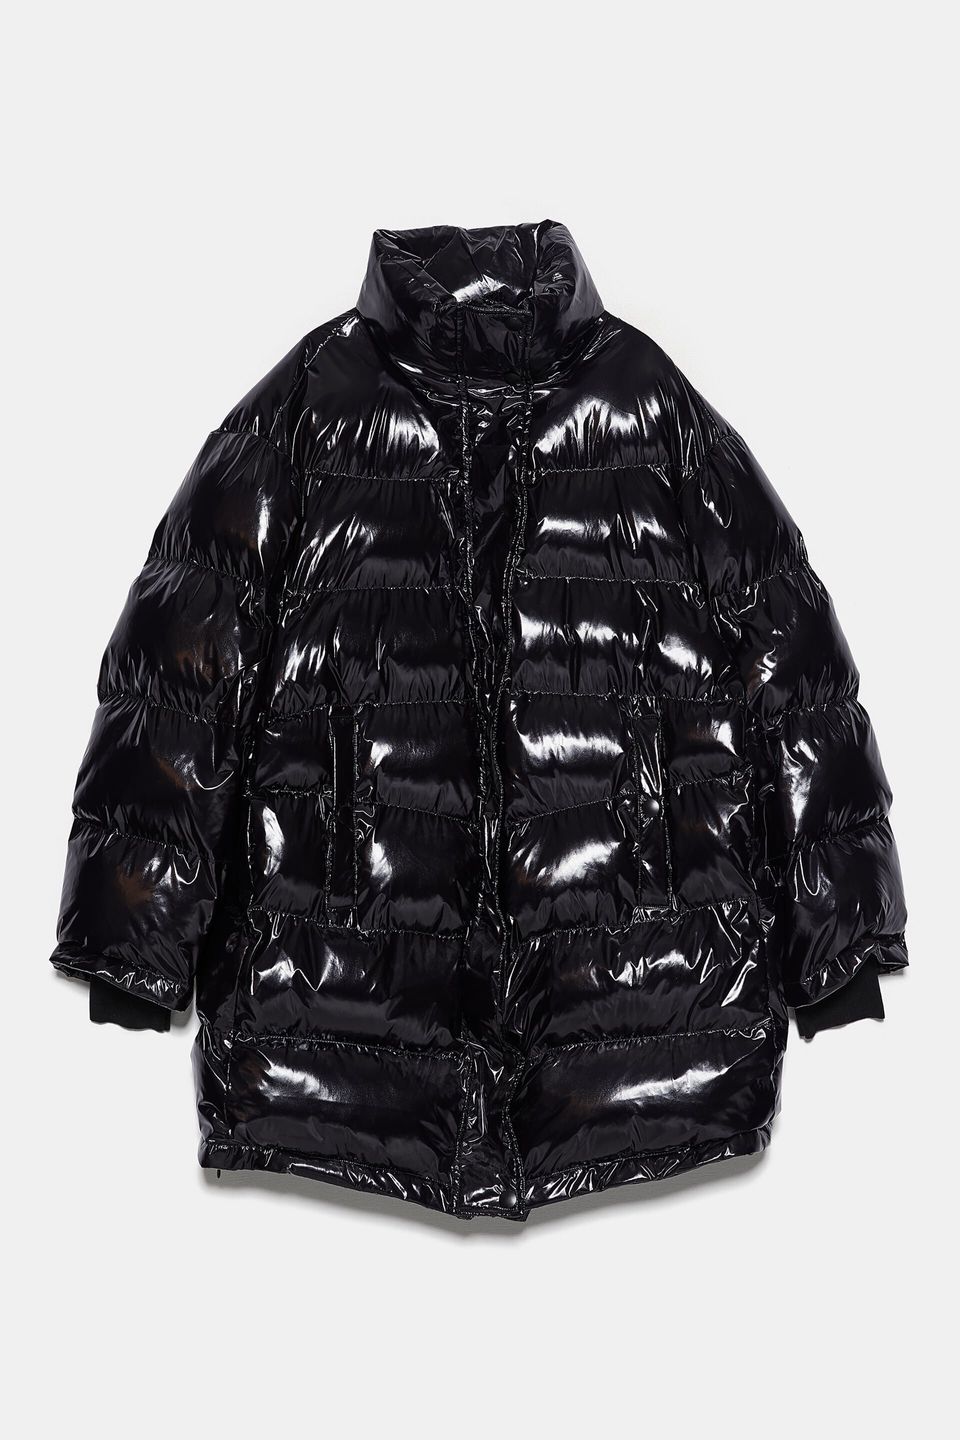 12 Puffer Coats That Aren't Boring, Because Most Puffer Coats Are ...